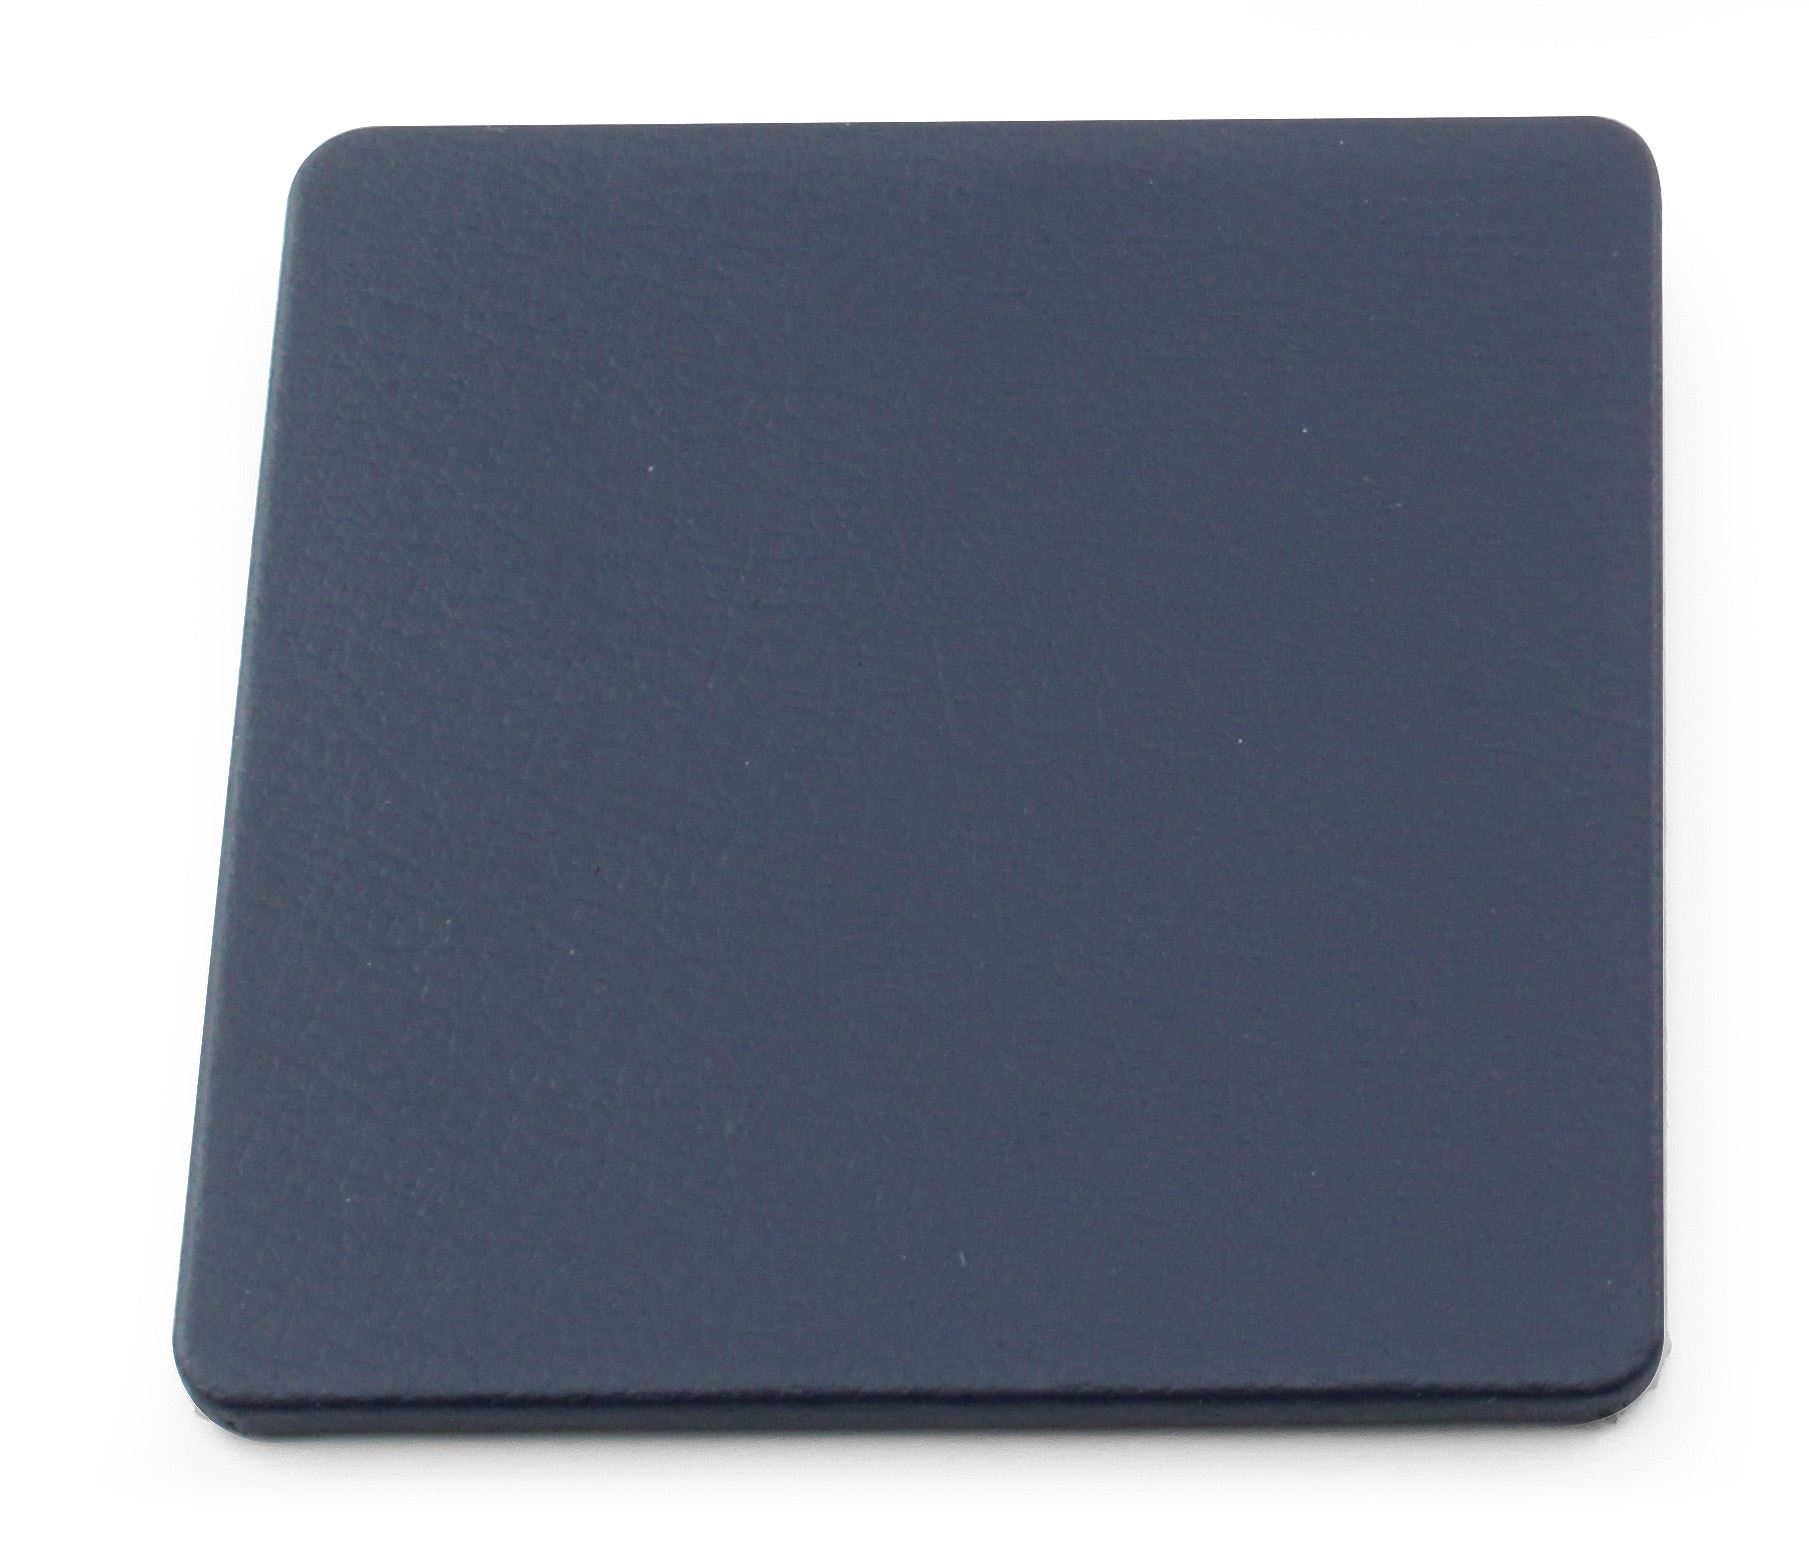 Recycled ELeather Square Stitched Coaster, made in the UK in a choice of 8 colours.